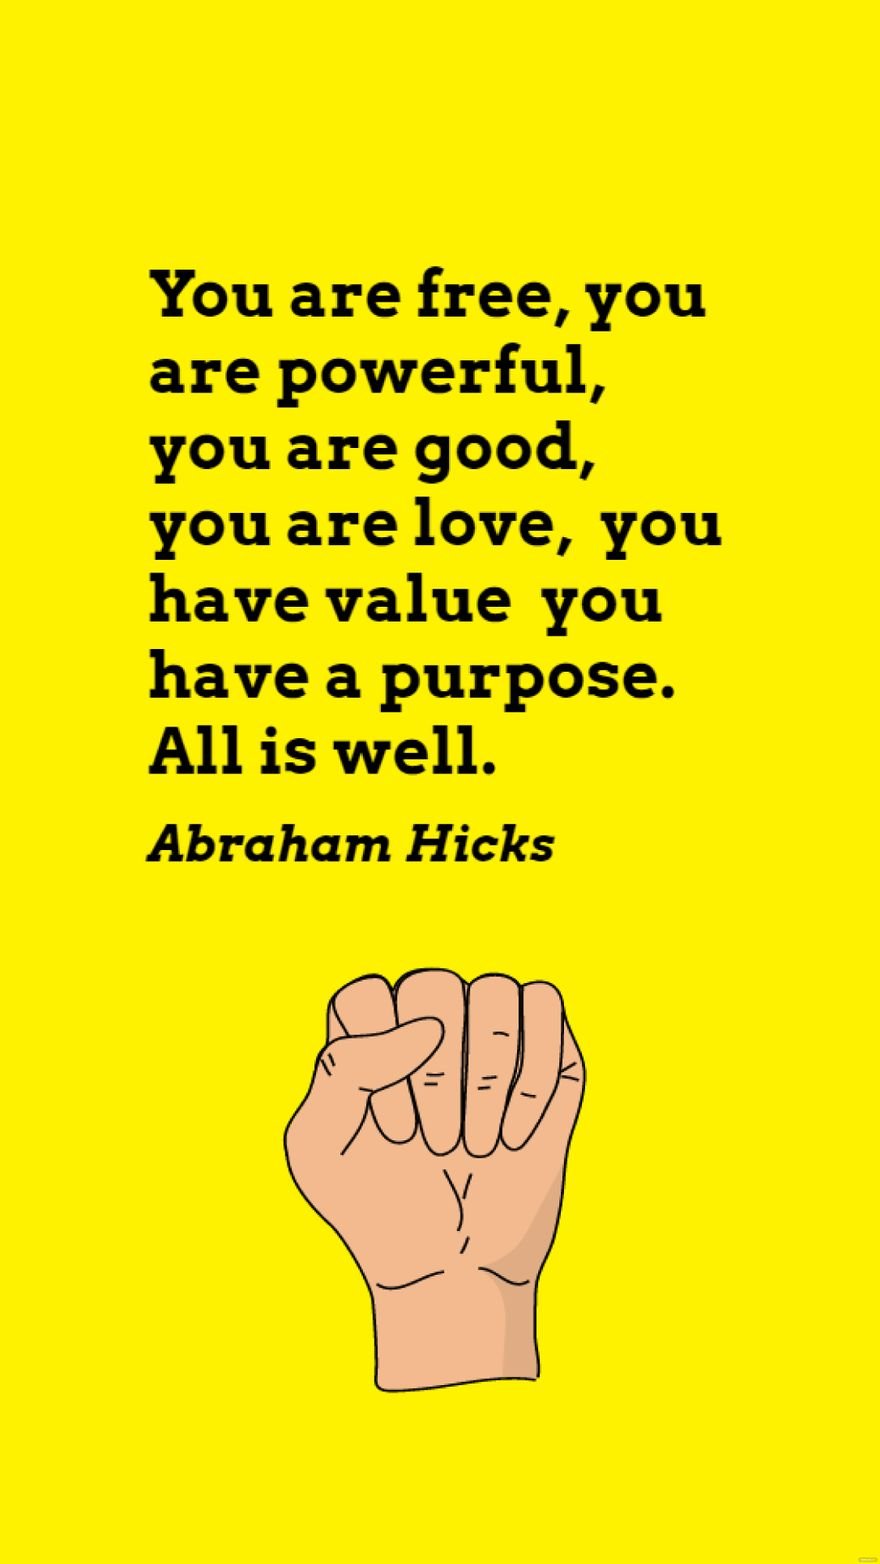 Abraham Hicks - You are free, you are powerful, you are good, you are love, you have value you have a purpose. All is well.